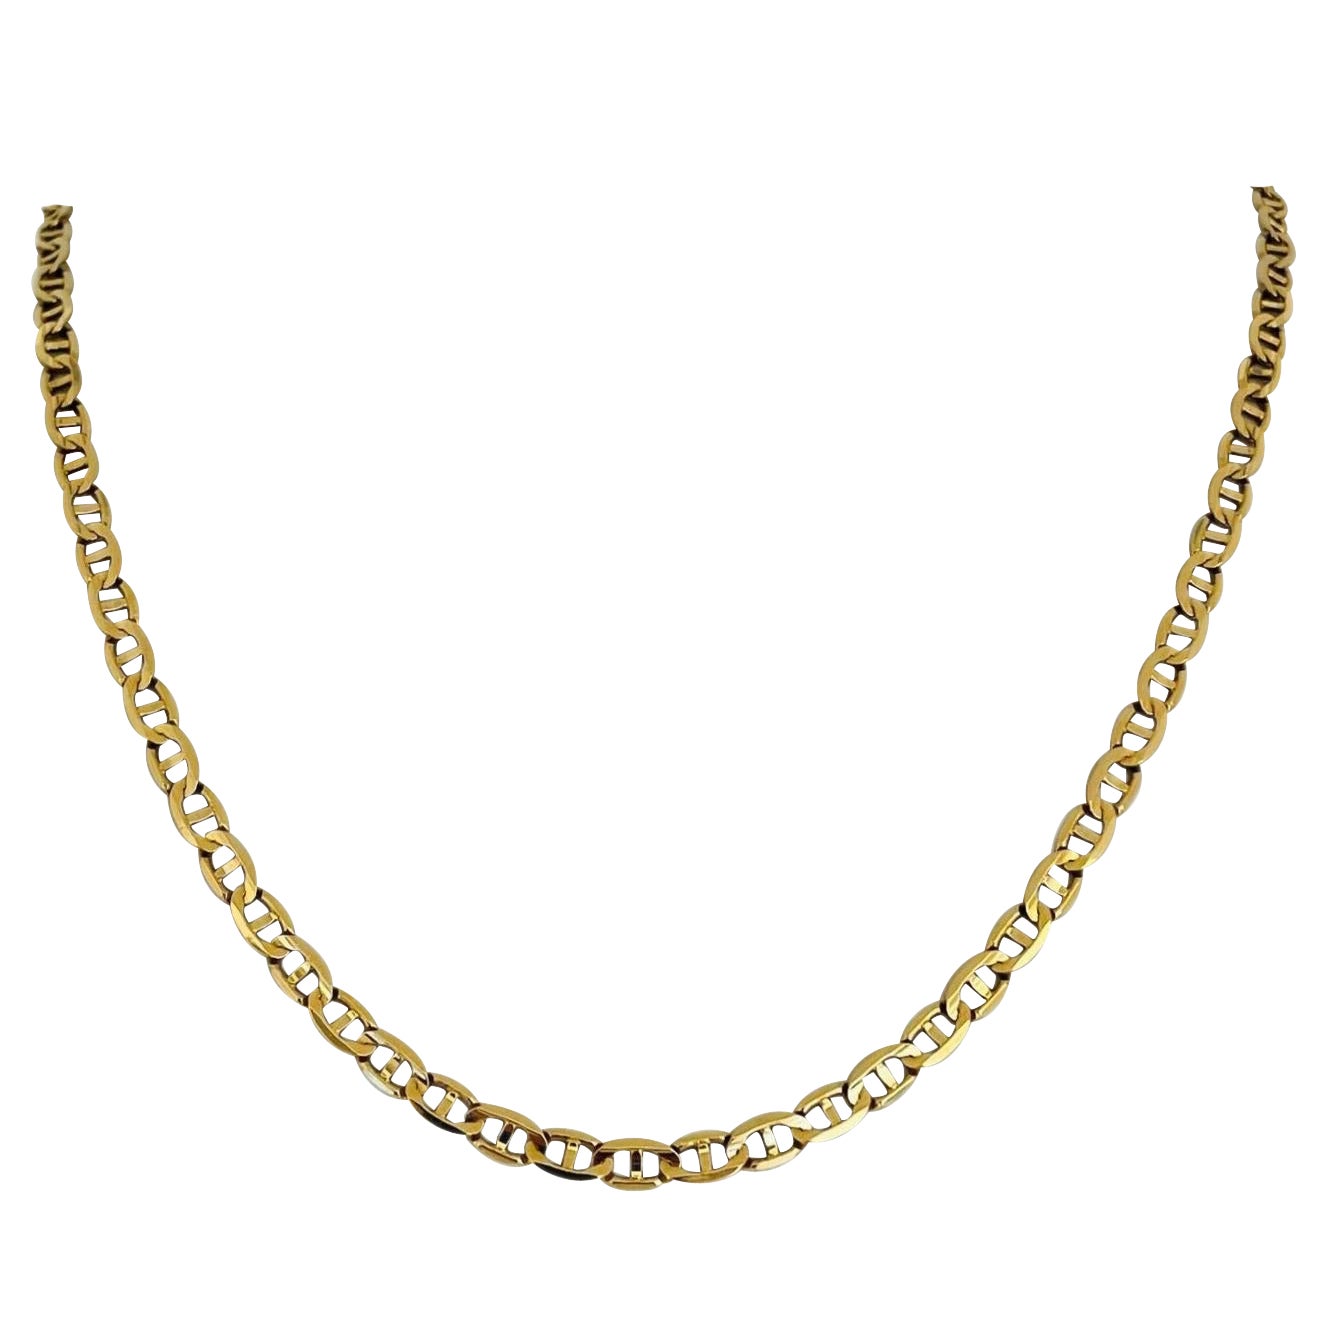 14 Karat Yellow Gold Solid Mariner Gucci Link Chain Necklace, Italy 